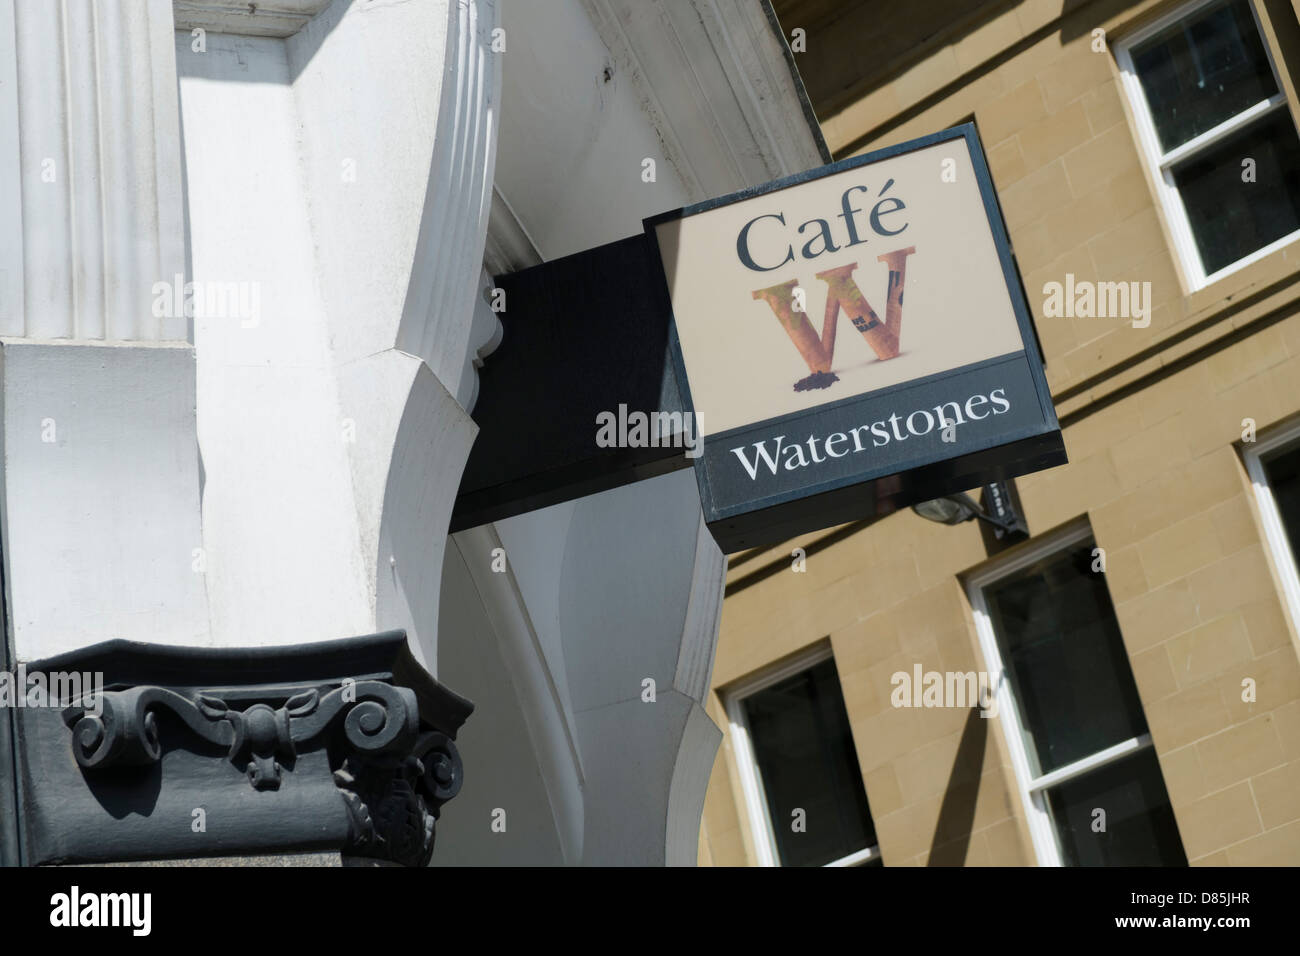 Waterstones book shop and café. Stock Photo